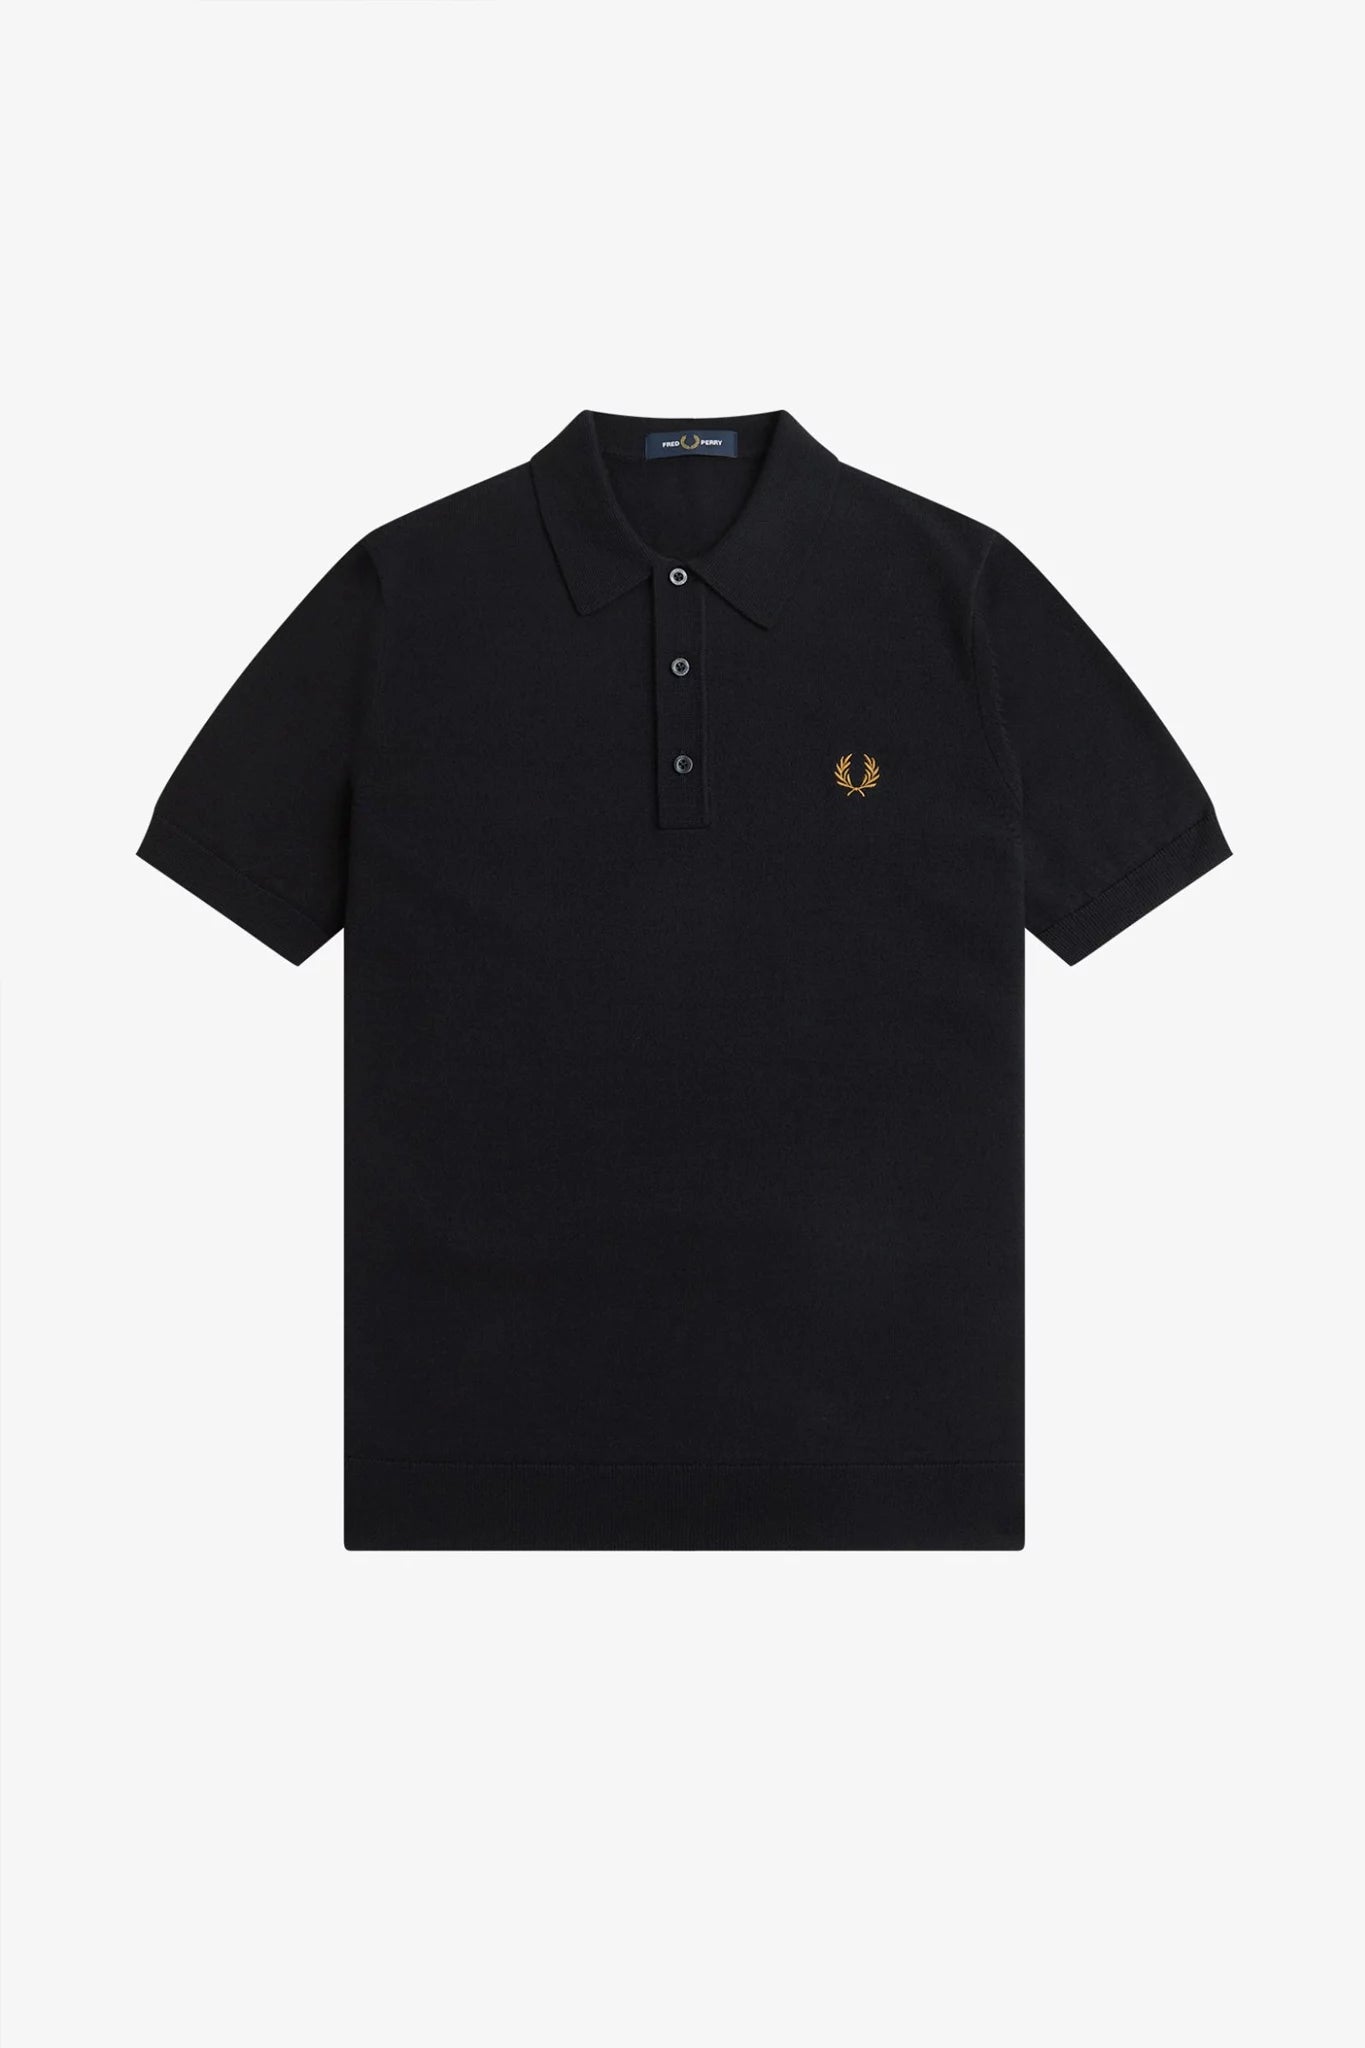 Classic Knitted Shirt Sweaters &amp; Knits Fred Perry   